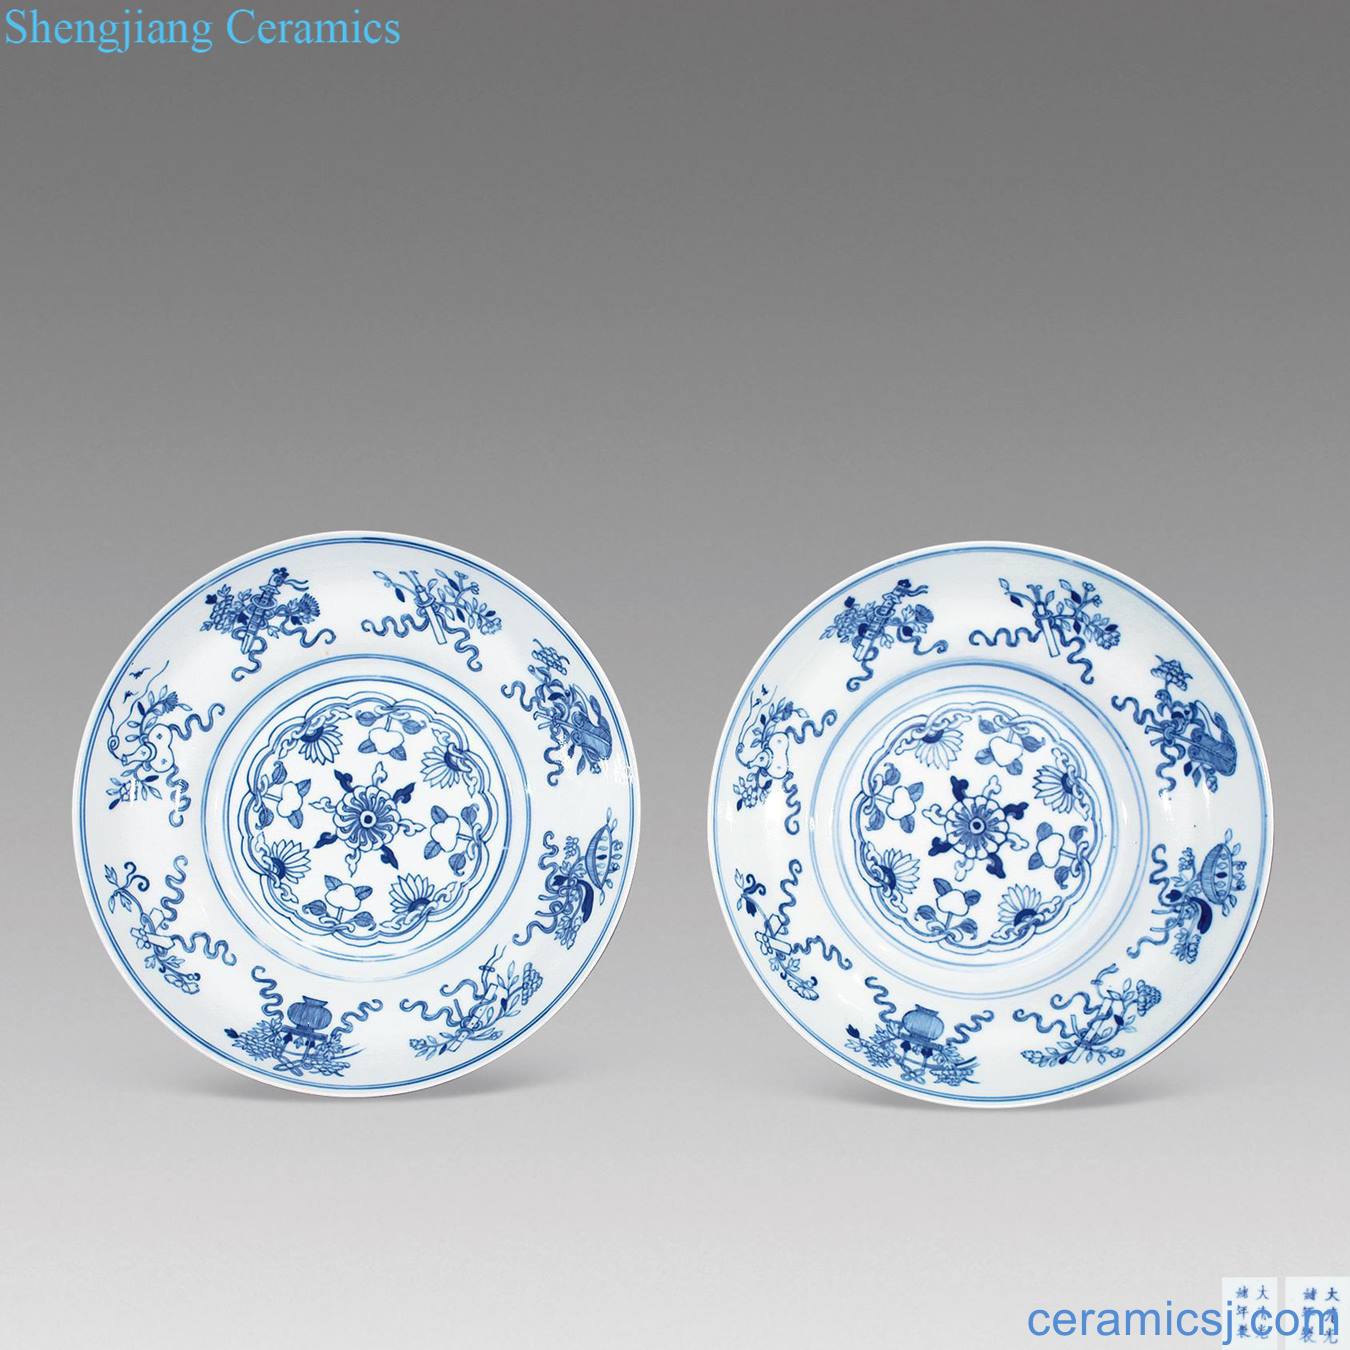 Qing guangxu Blue and white sweet count plate (a)